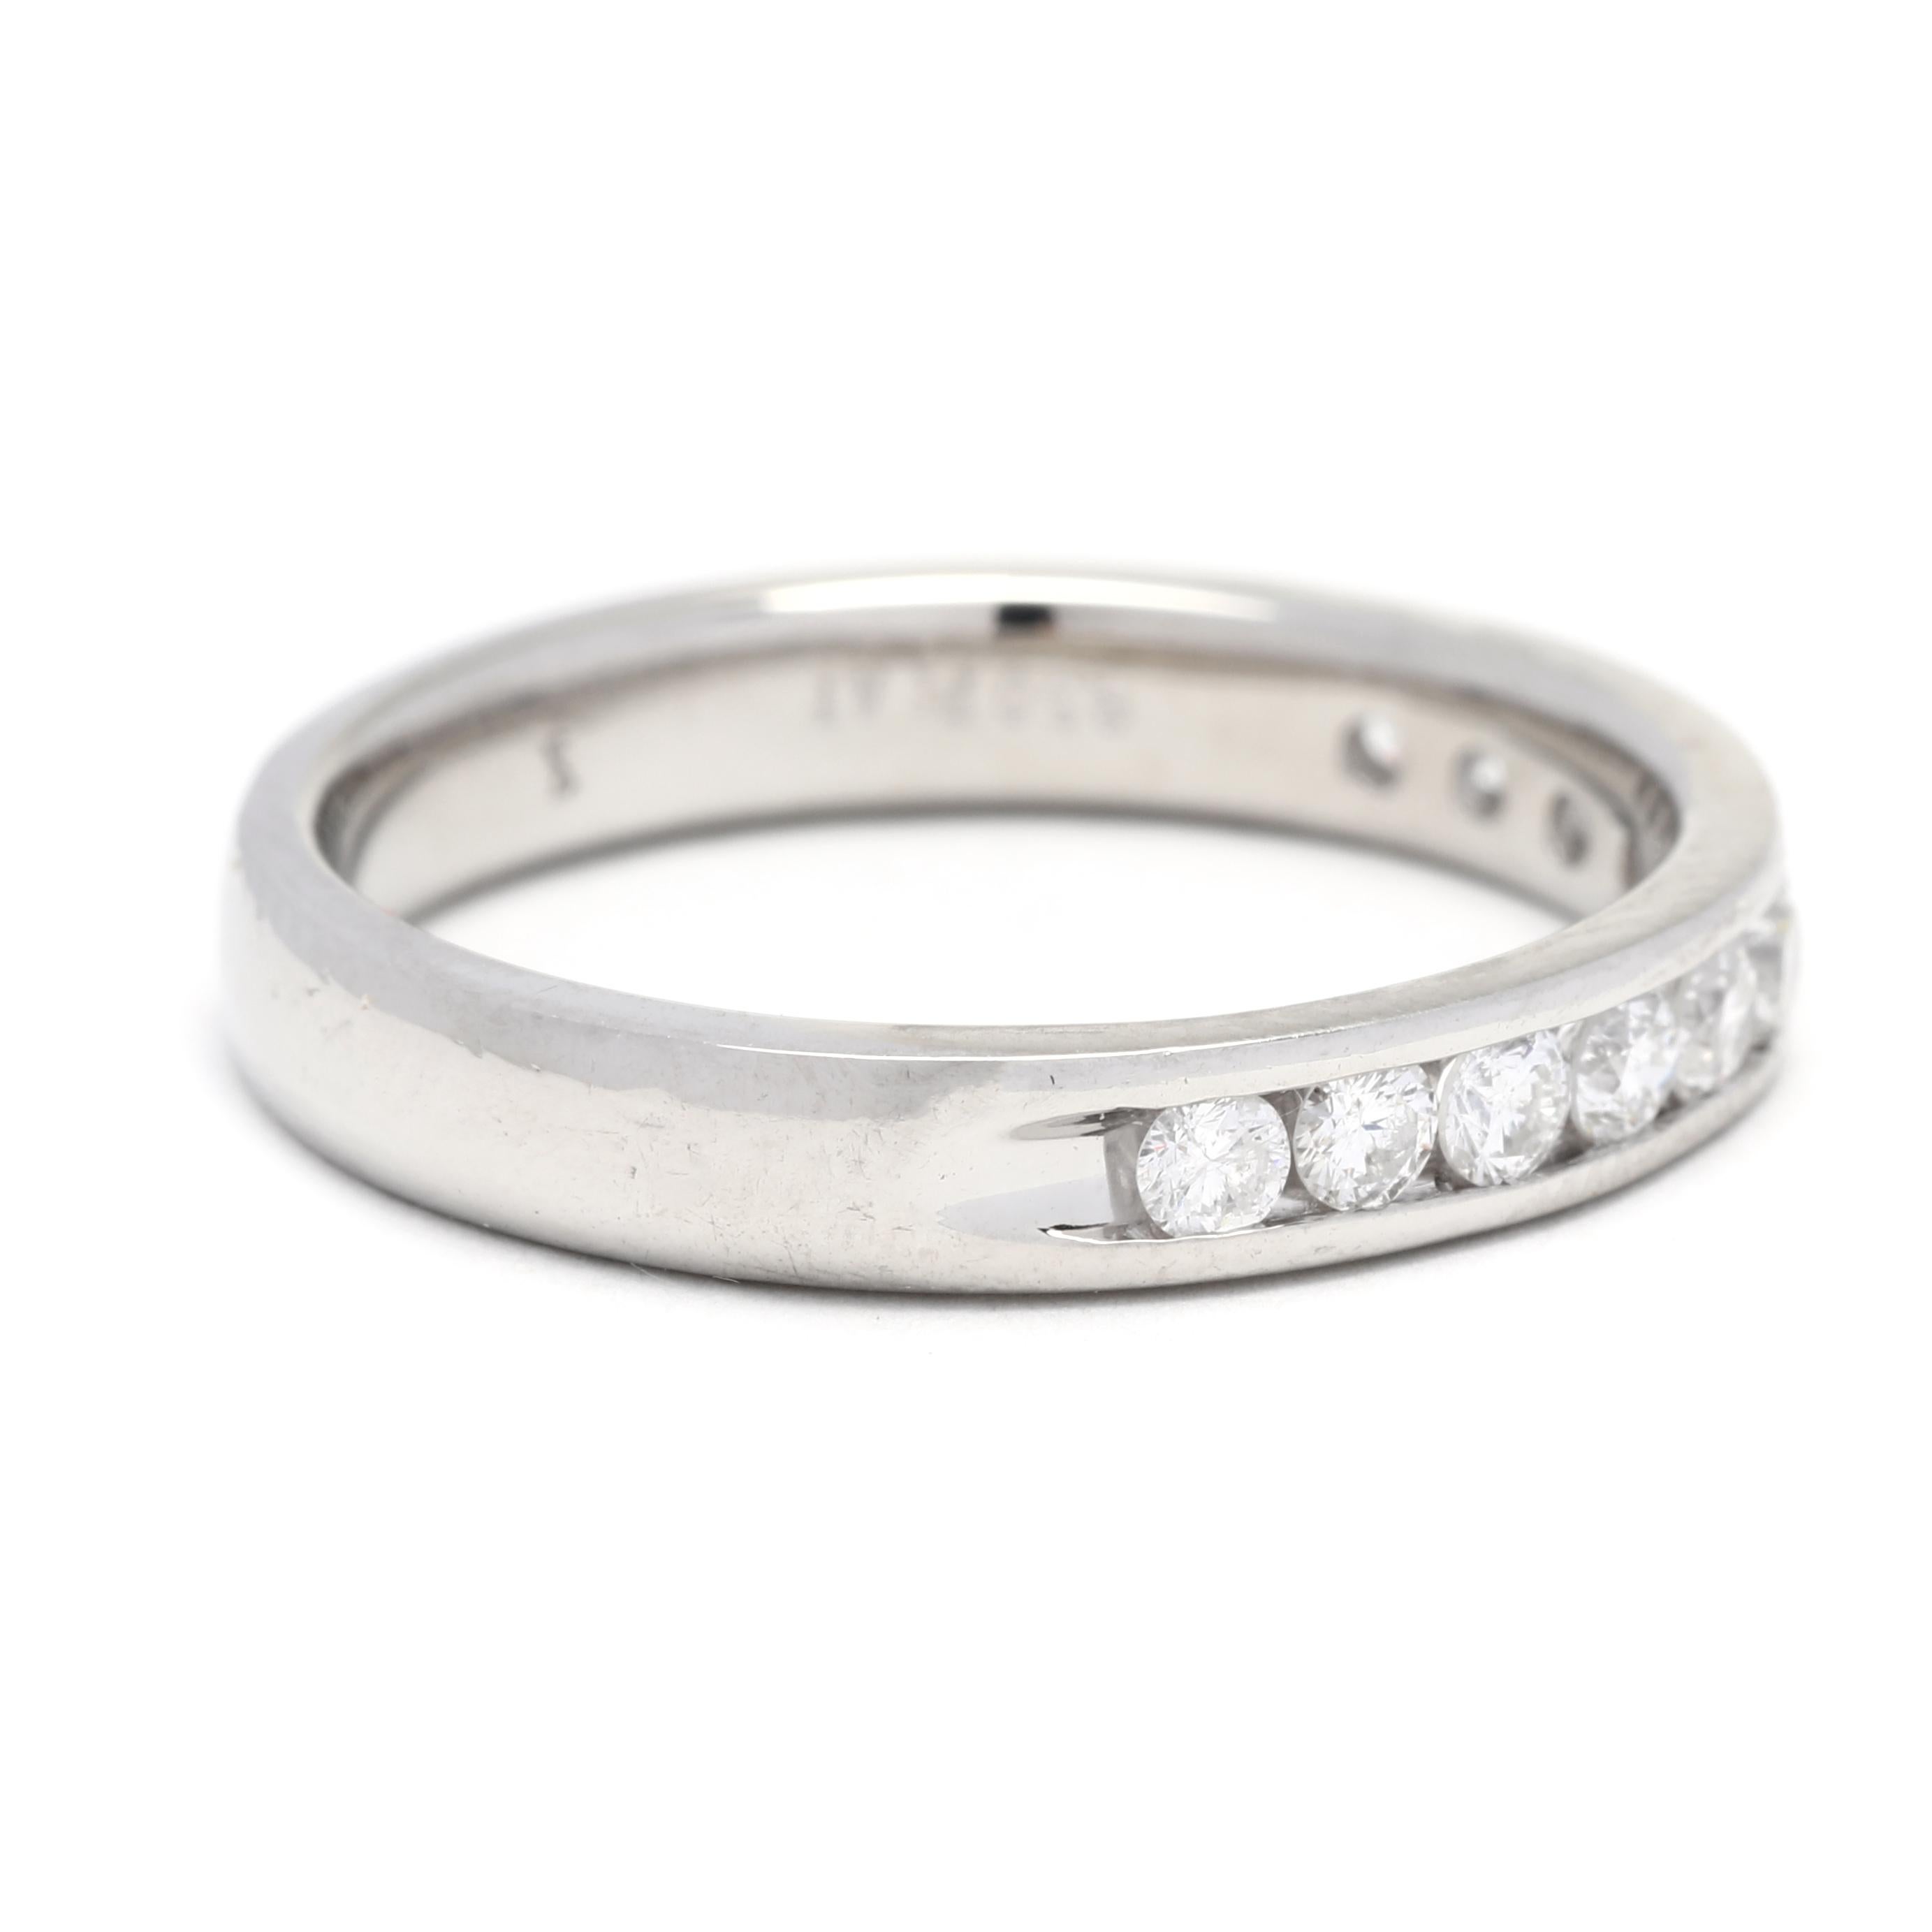 This beautiful 1/2ctw diamond channel set wedding band is the perfect addition to any jewelry collection. Crafted in Platinum and ring size 7, this stackable diamond band is sure to be a timeless classic. The sparkling stones are set in a channel